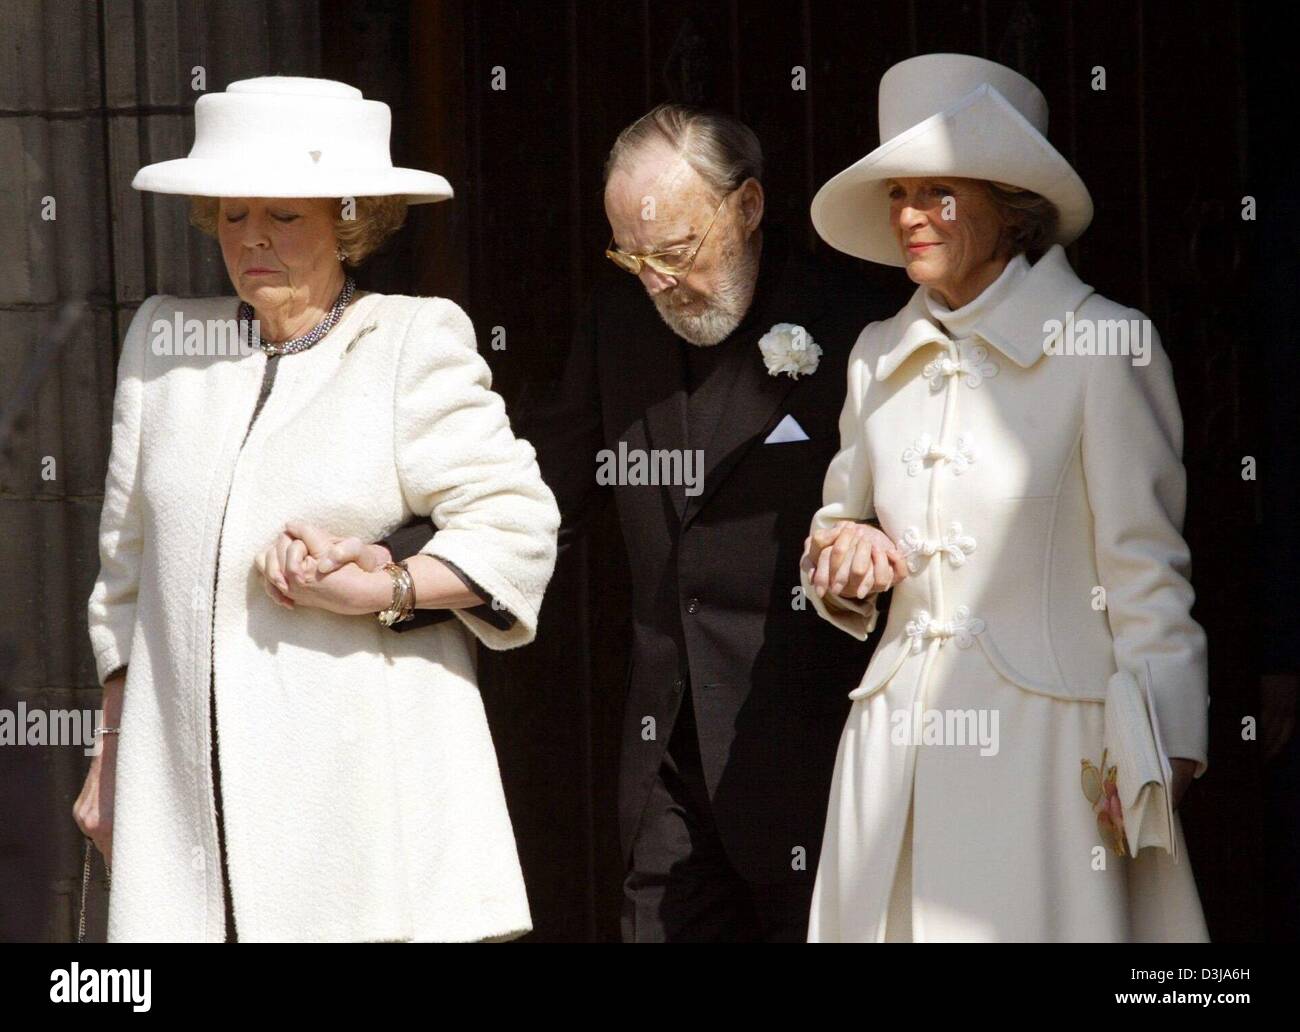 (dpa) -  Queen Beatrix (L) of the Netherlands and her sister Princess Irene (R) support Prince Bernhard as they attend the funeral of former Dutch Queen Juliana at the Nieuwe Kerk (New Church) in Delft, Netherlands, 30 March 2004. The former queen died on 20 March 2004 at the age of 94 and was buried in the family crypt in Delft. Crowds of people arrived to witness the event. Stock Photo